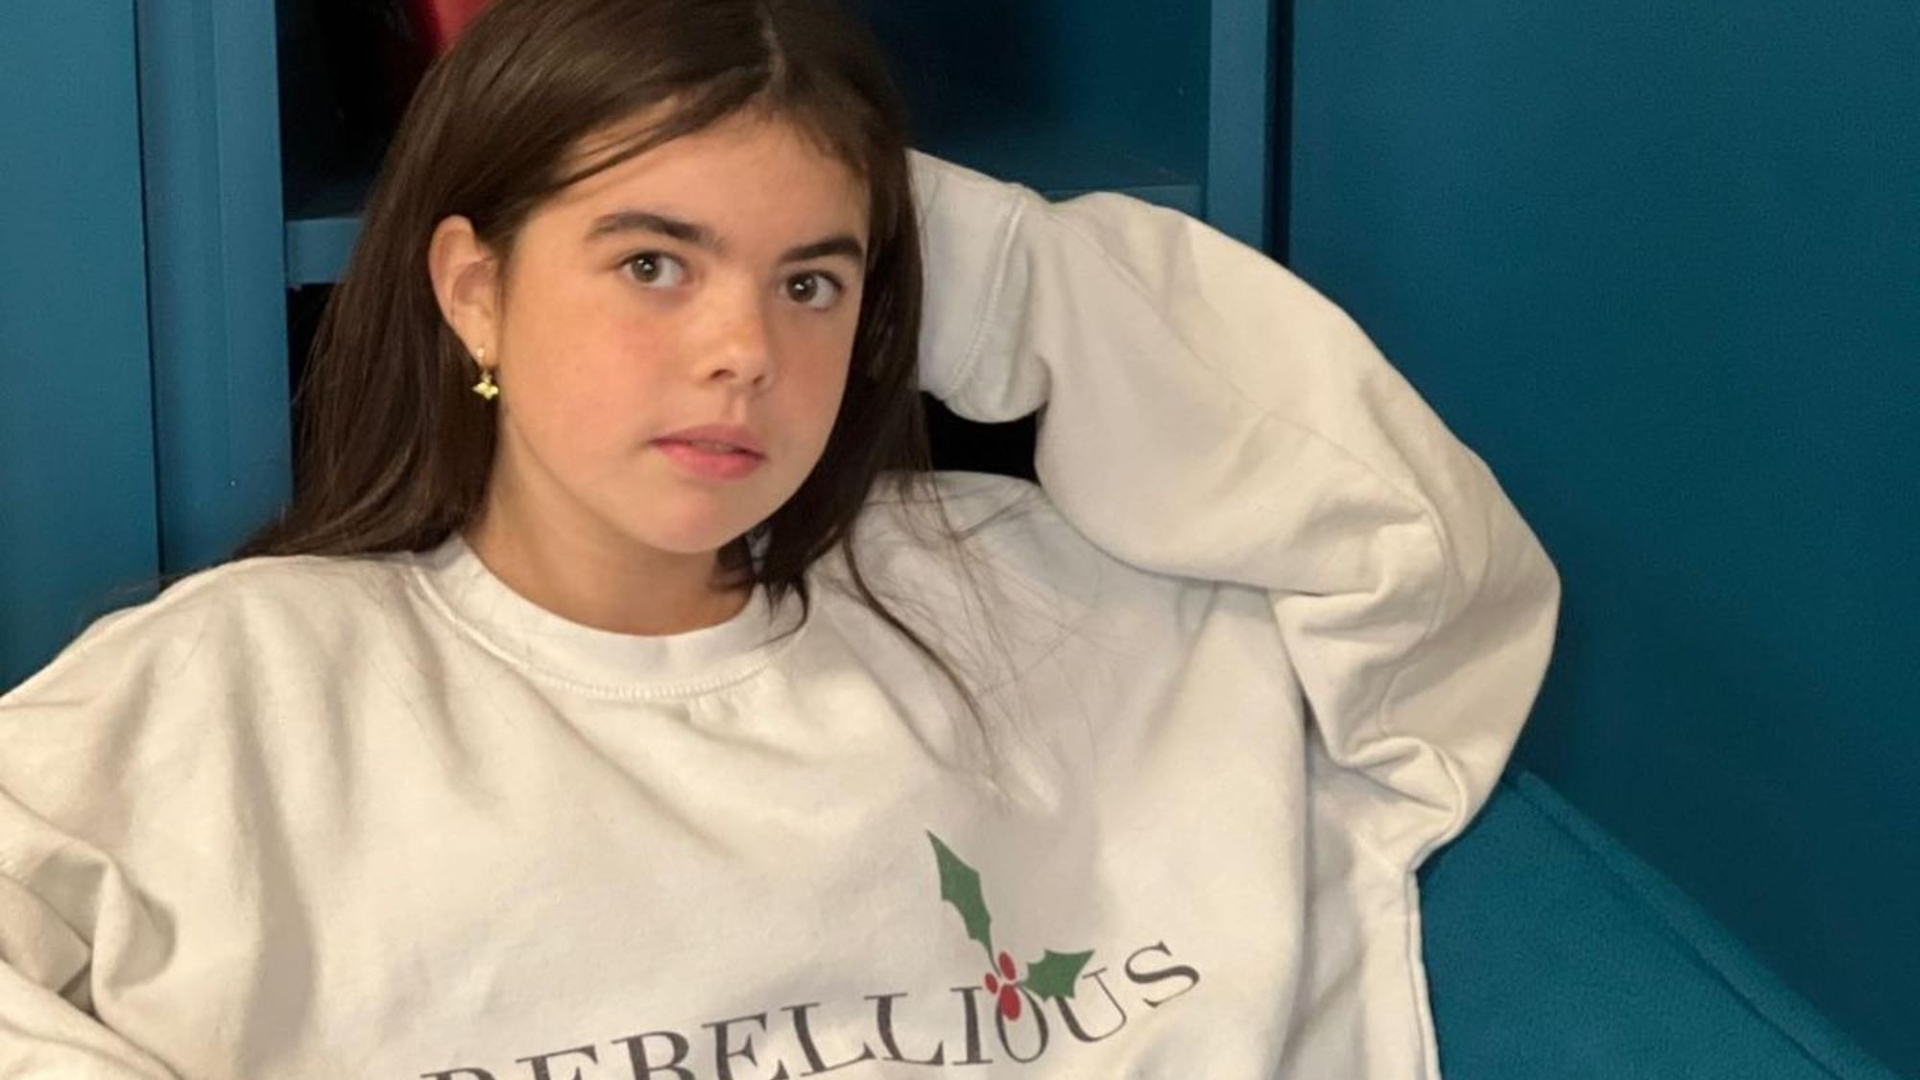 Deborah James’s daughter is wearing a charity Christmas jumper. Family reveals that they believe it’s possible to keep ‘a little bit of Deb’s light’.